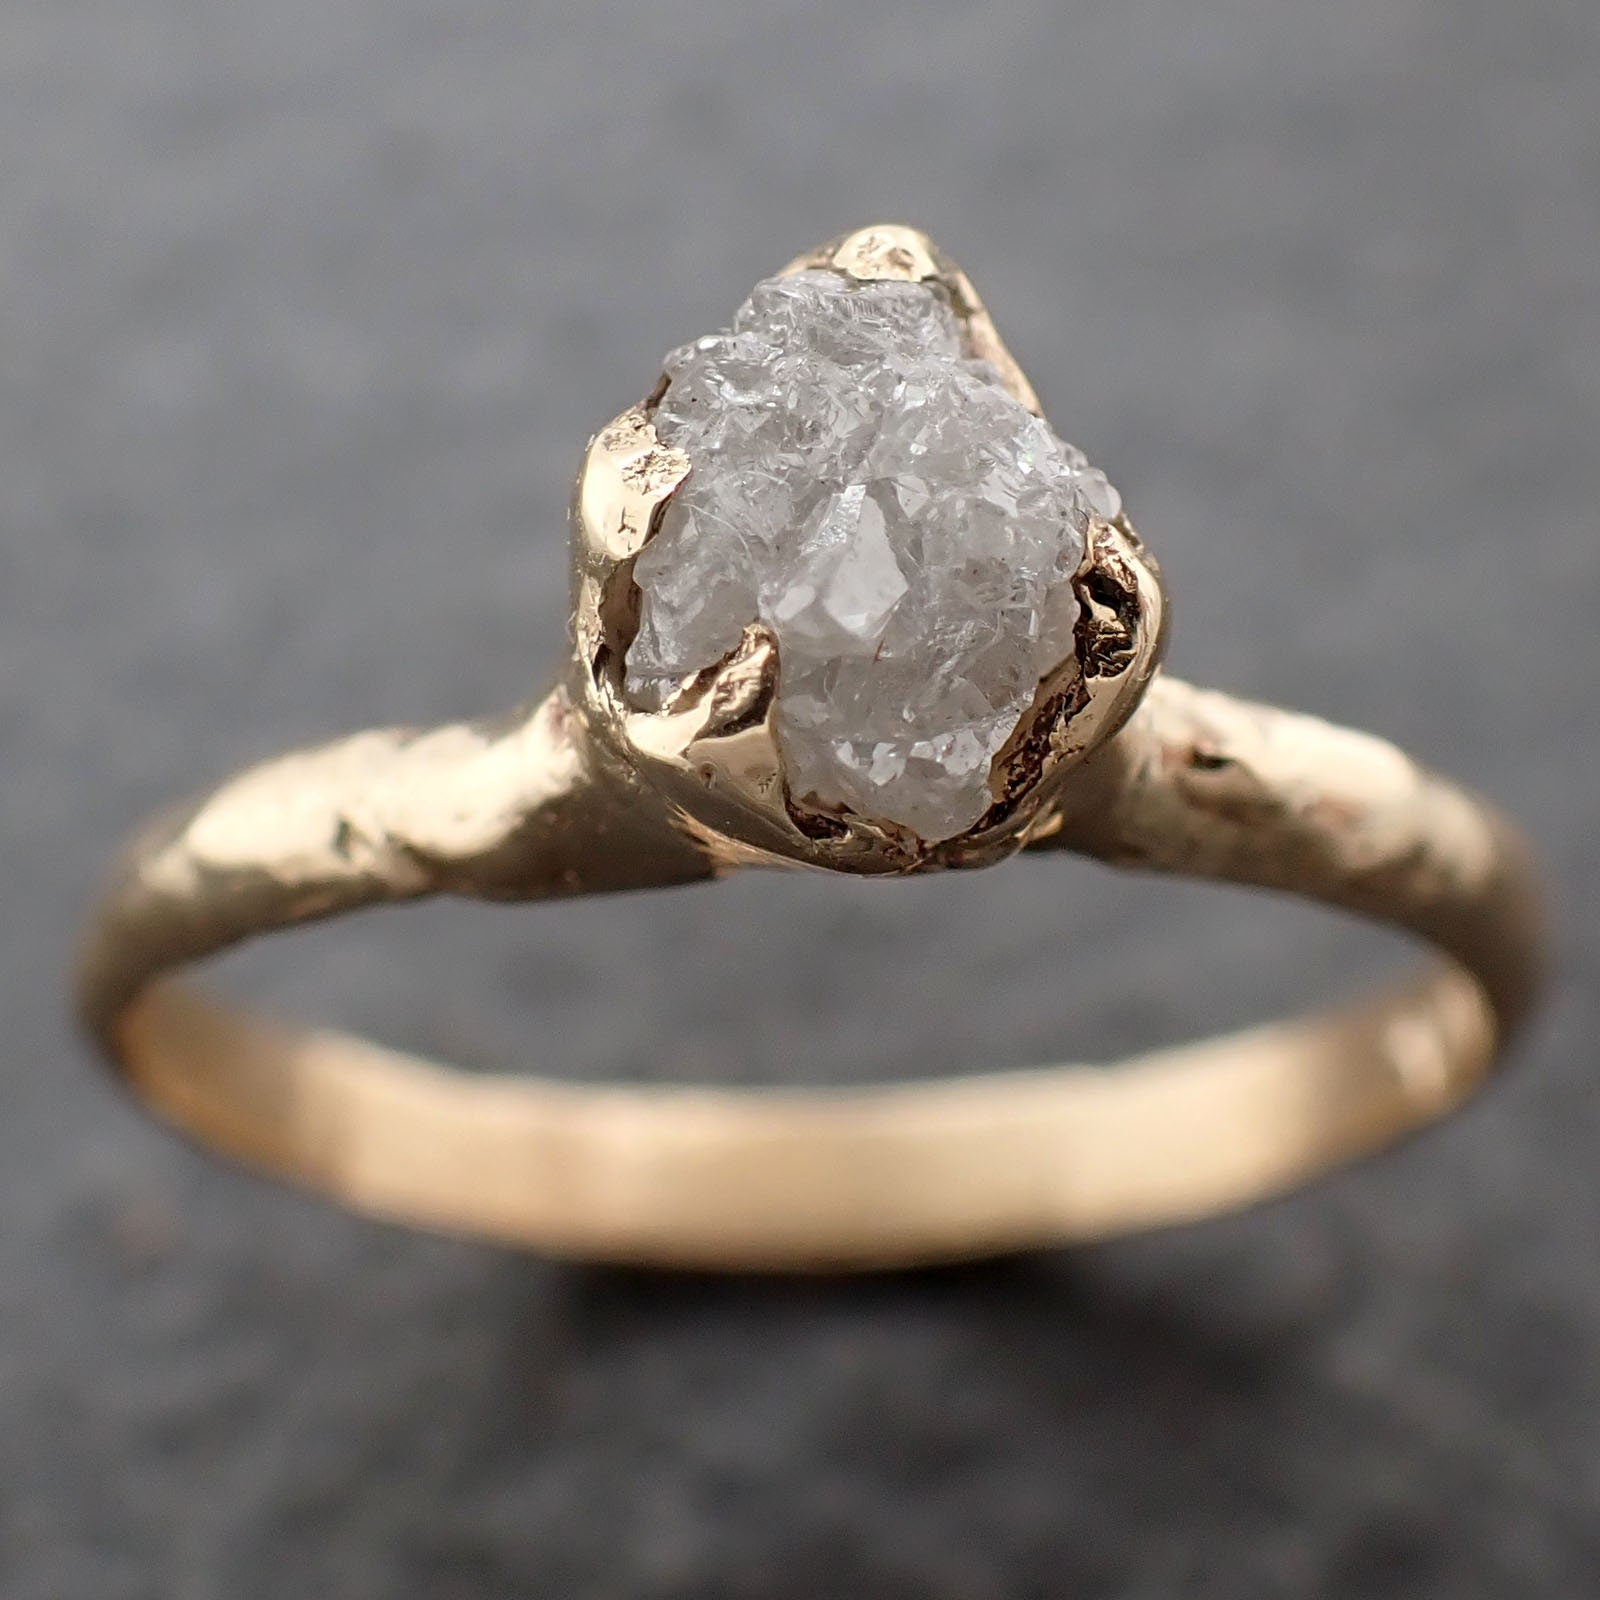 Raw Diamond Engagement Ring Rough Uncut Diamond Solitaire Recycled 14k yellow gold Conflict Free Diamond Wedding Promise 3188